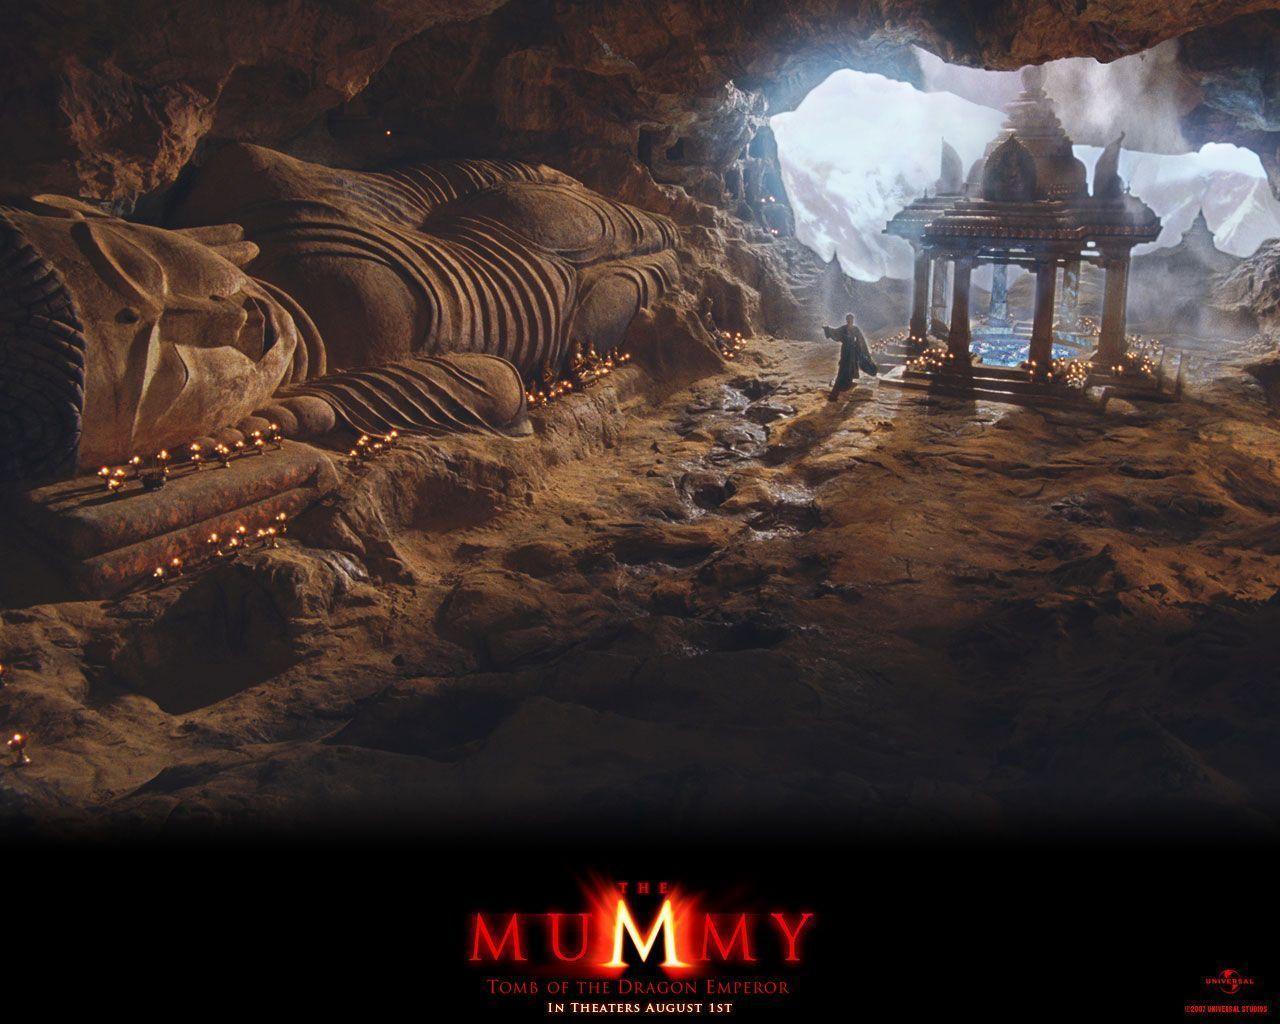 The Mummy: Tomb of the Dragon Emperor TheWallpaper. Free Desktop